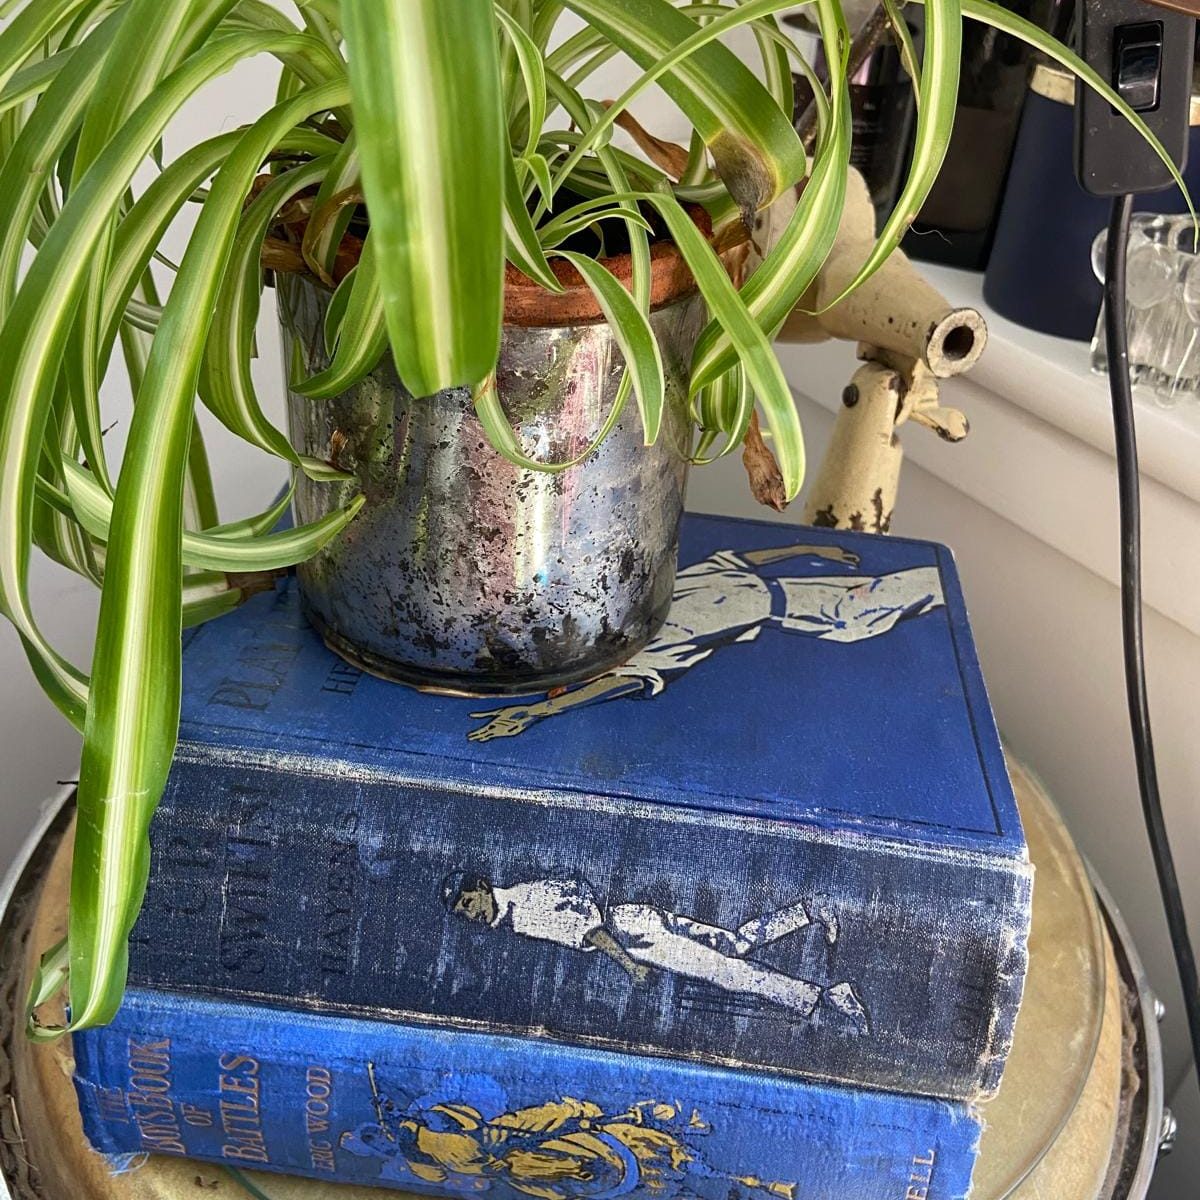 Two Blue Vintage Books in Hard-Back - For display on Coffee Table/Shelf